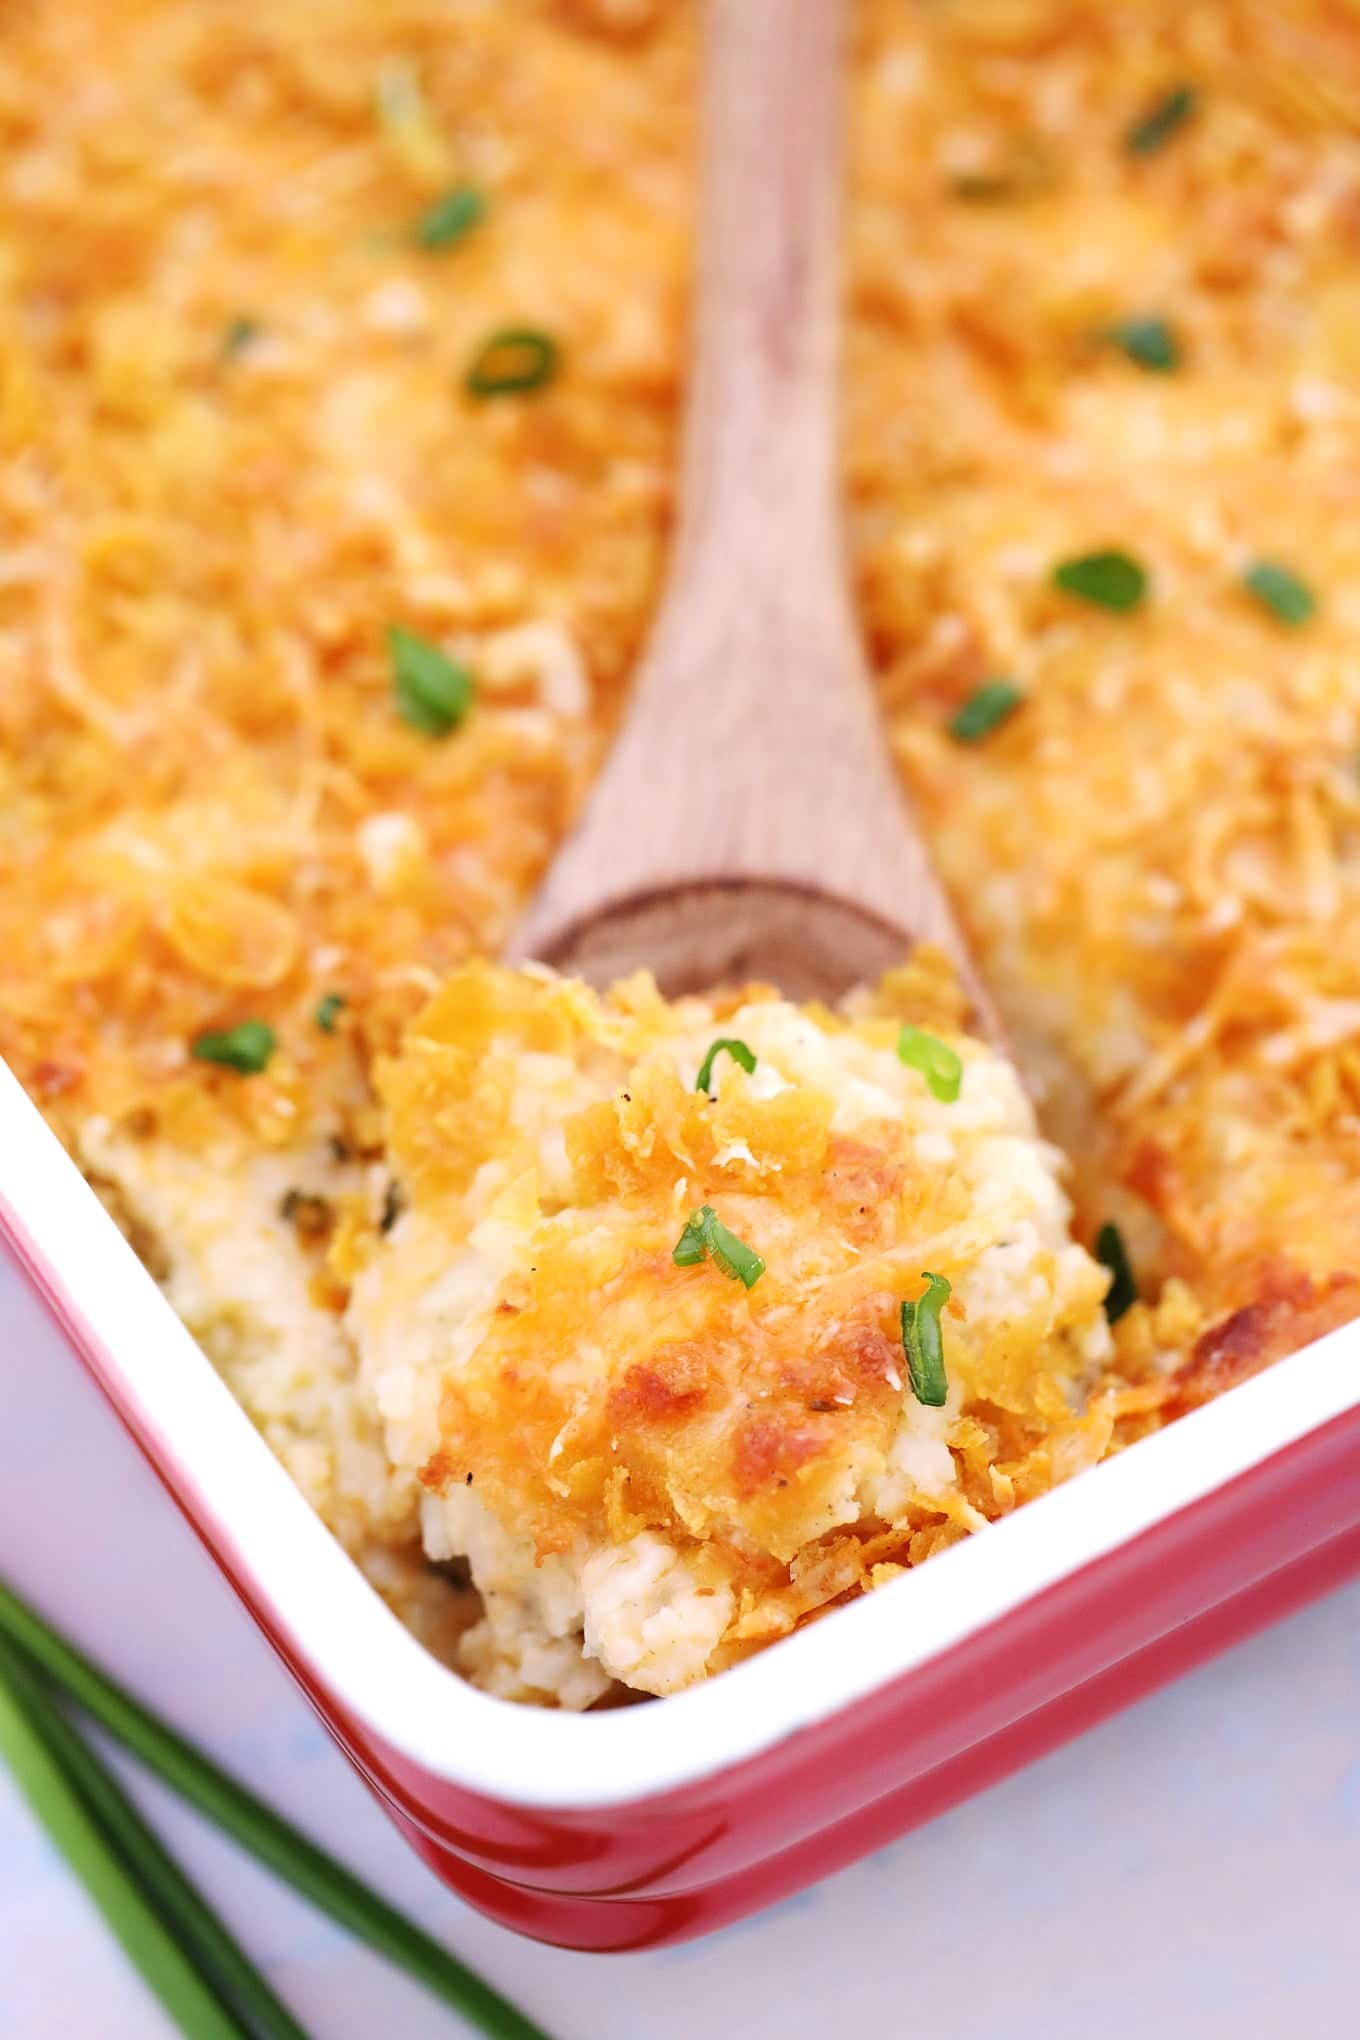 Cheesy Potatoes Serving Guide: How Much Per Person? - PlantHD